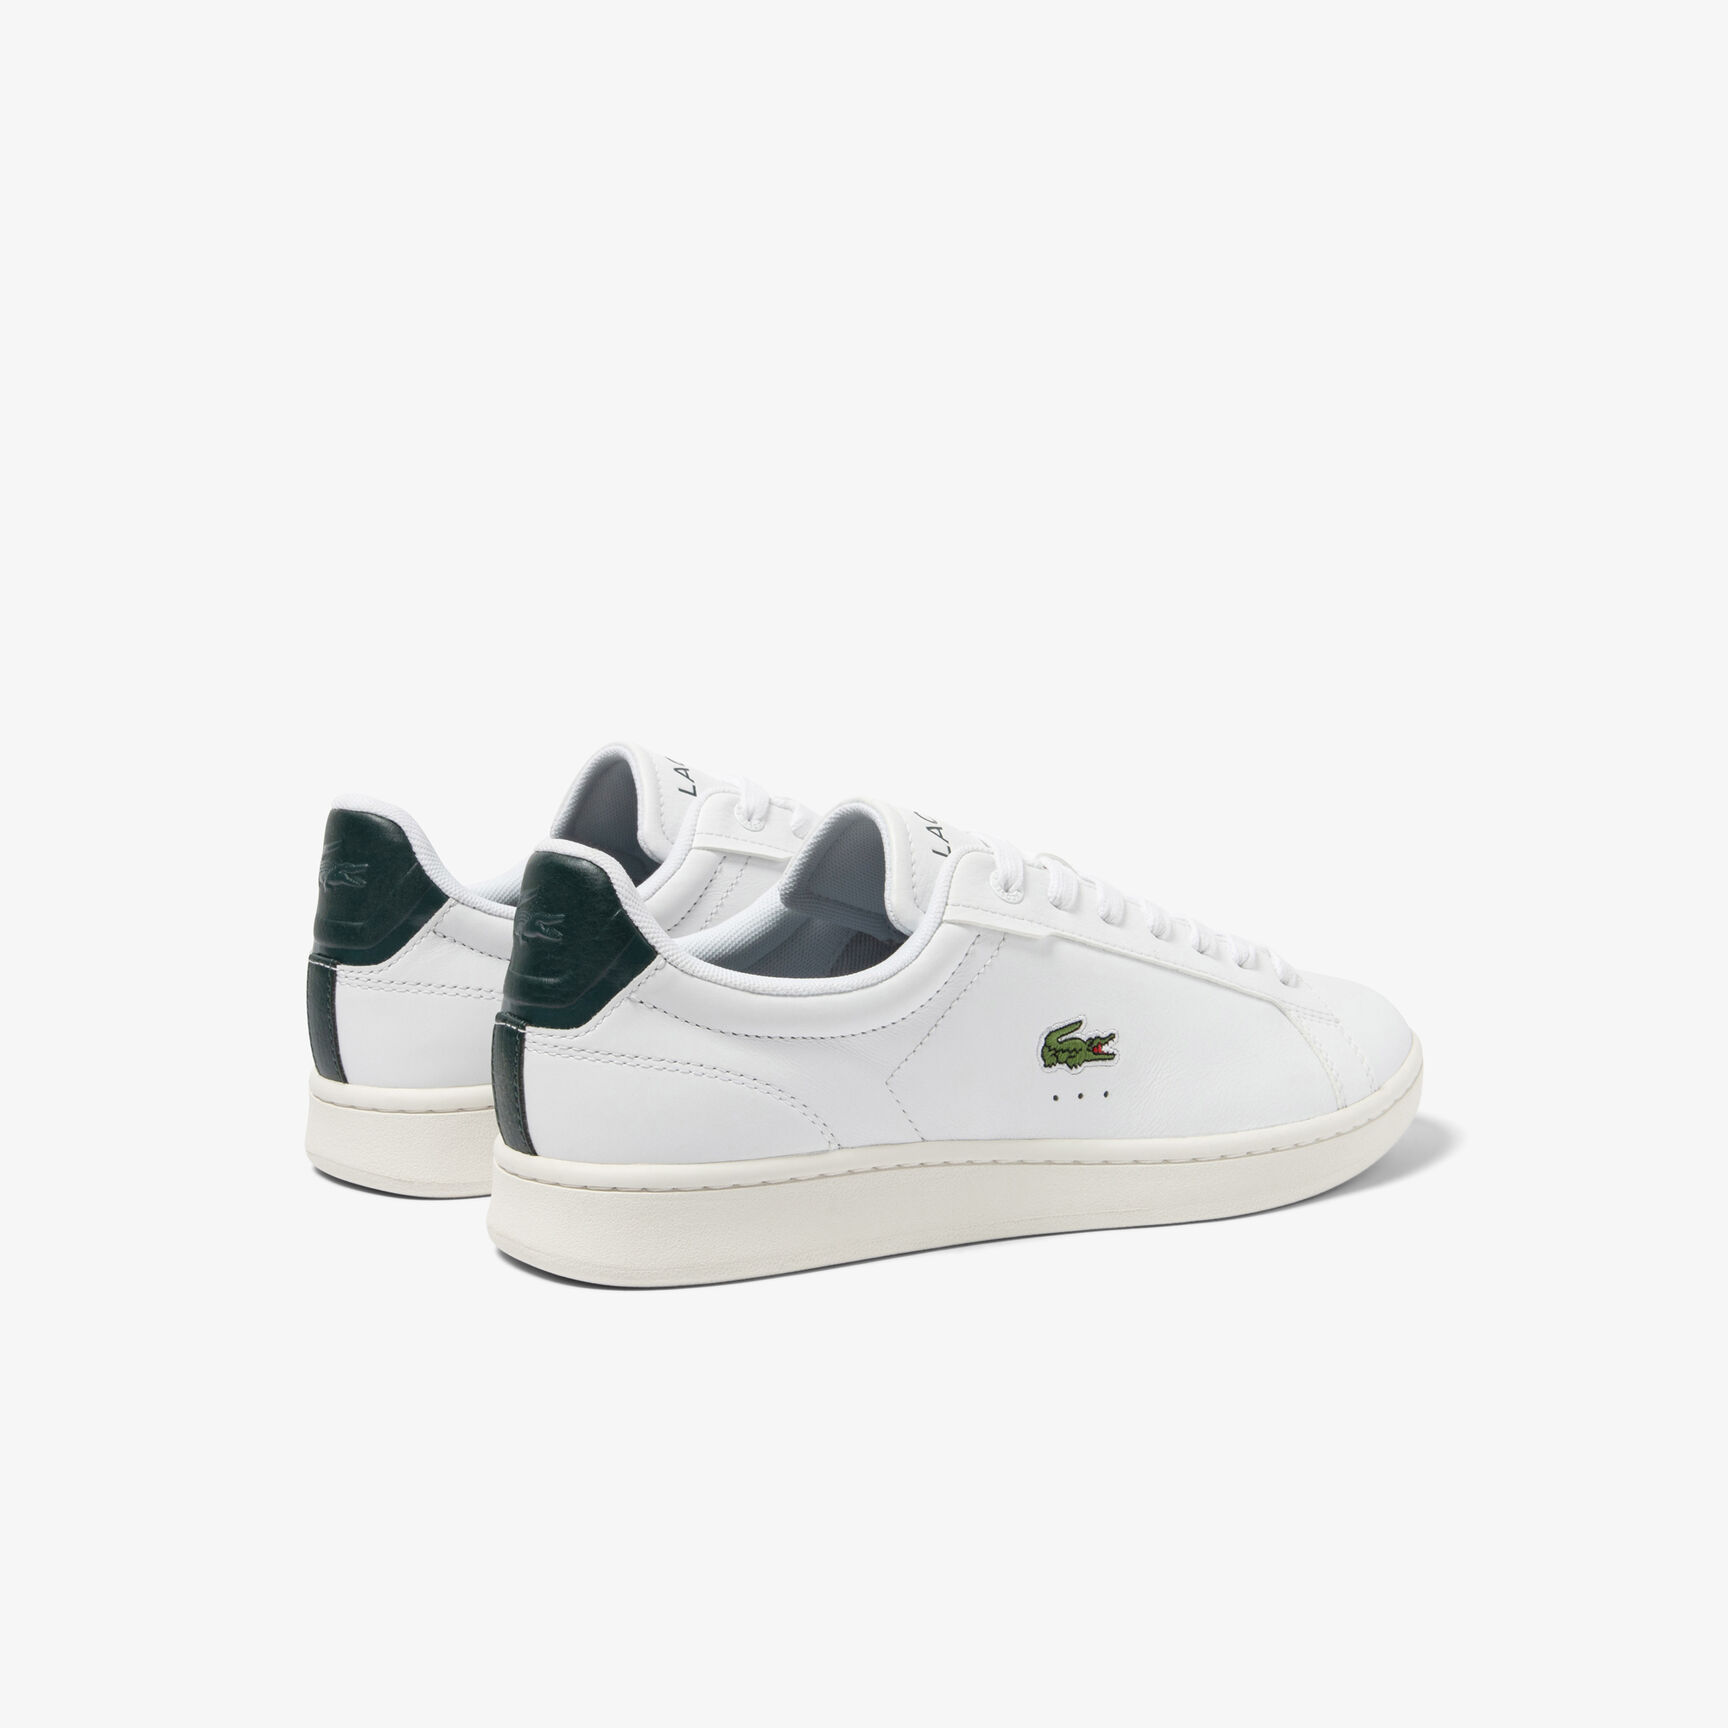 Buy Men's Lacoste Carnaby Pro Leather Premium Trainers | Lacoste UAE